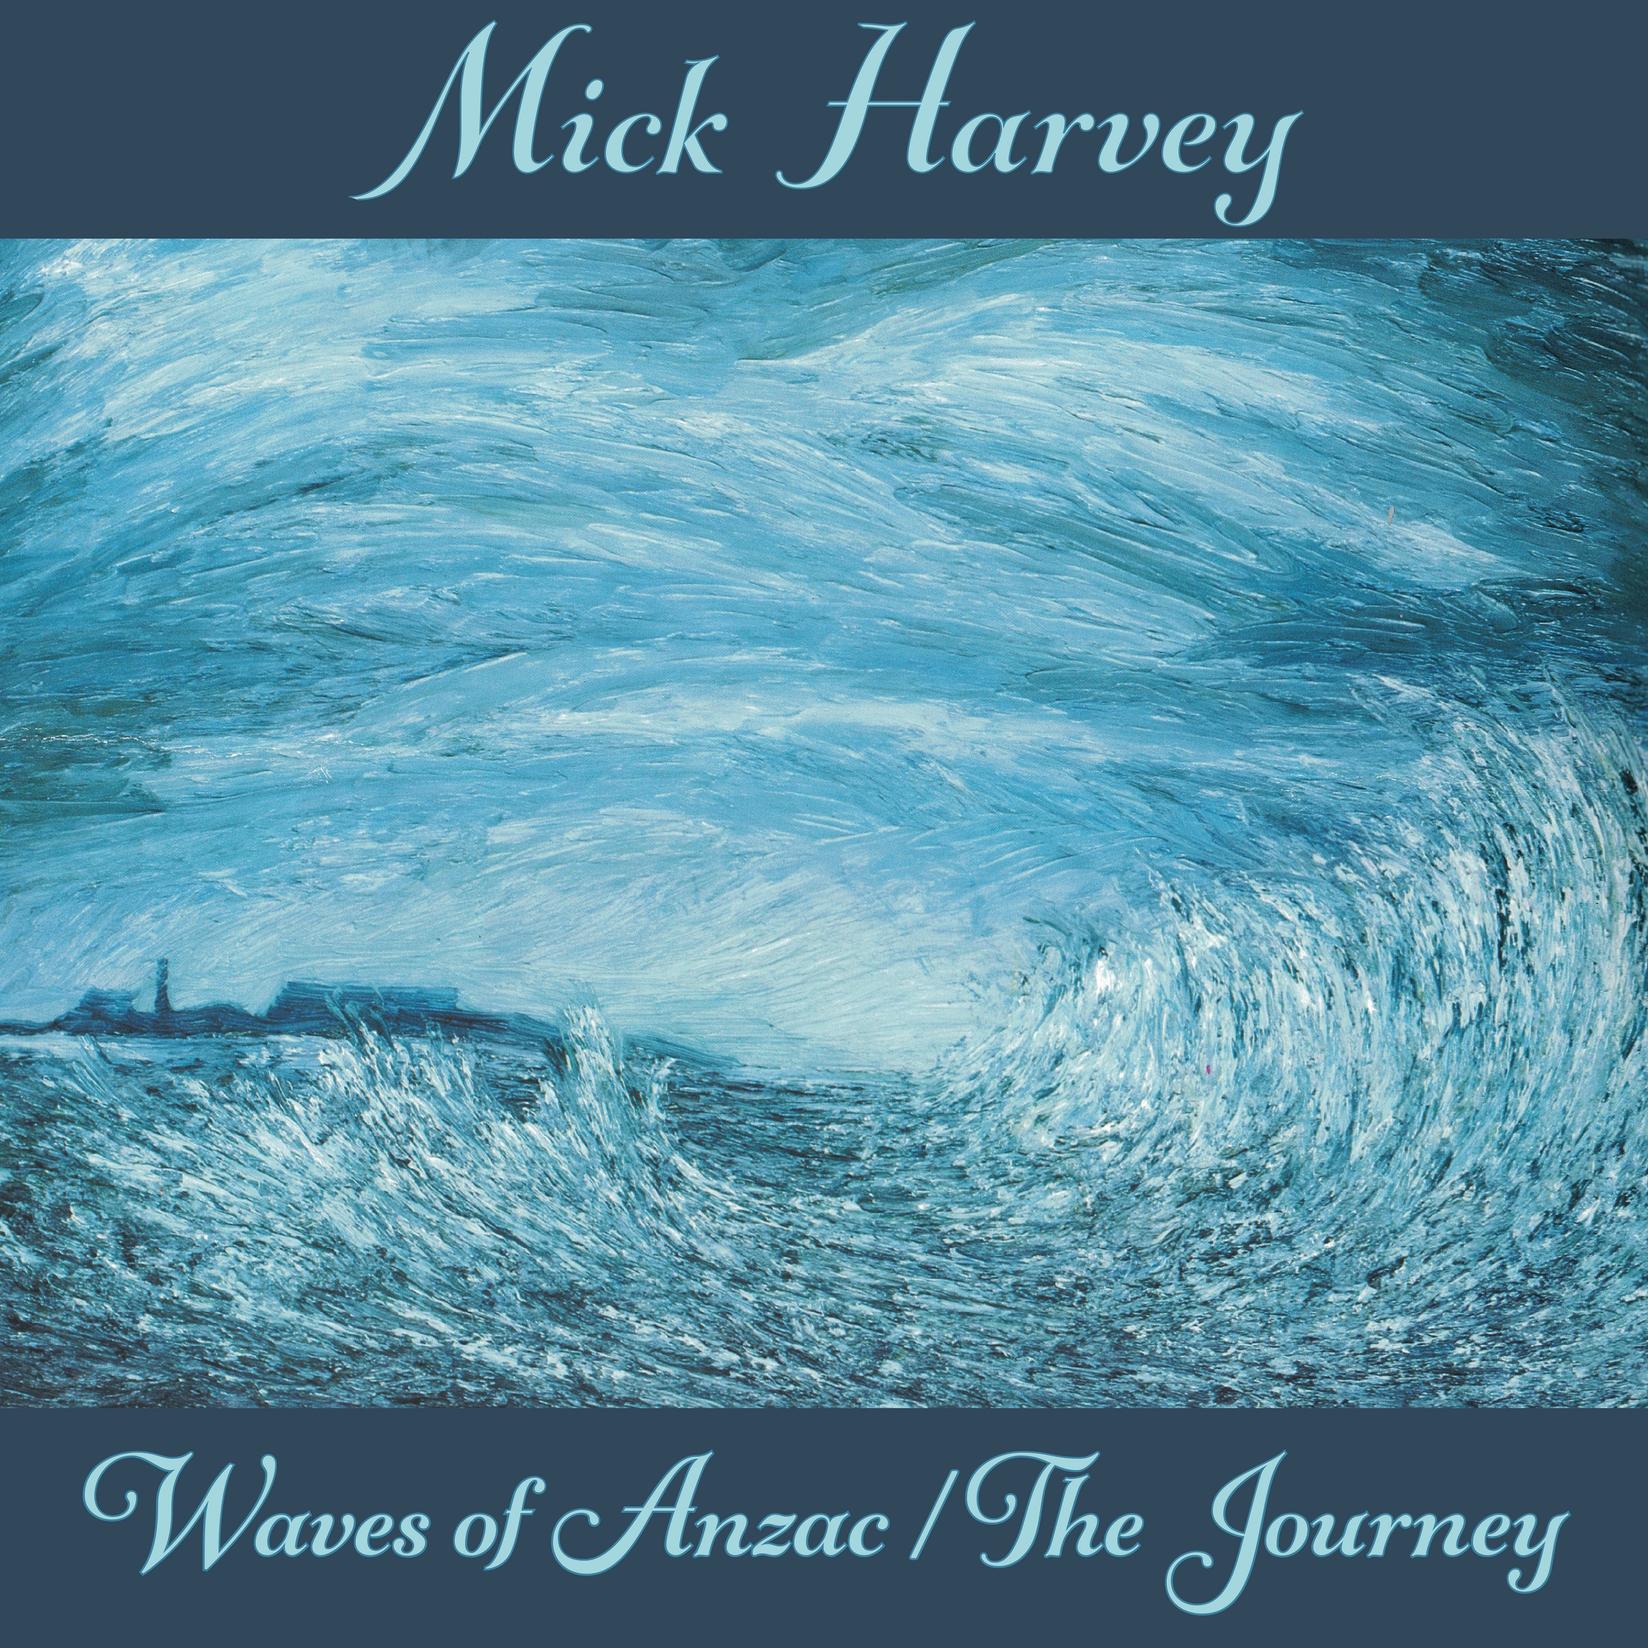 Selected image for MICK HARVEY - Waves of Anzac The Journey LP"